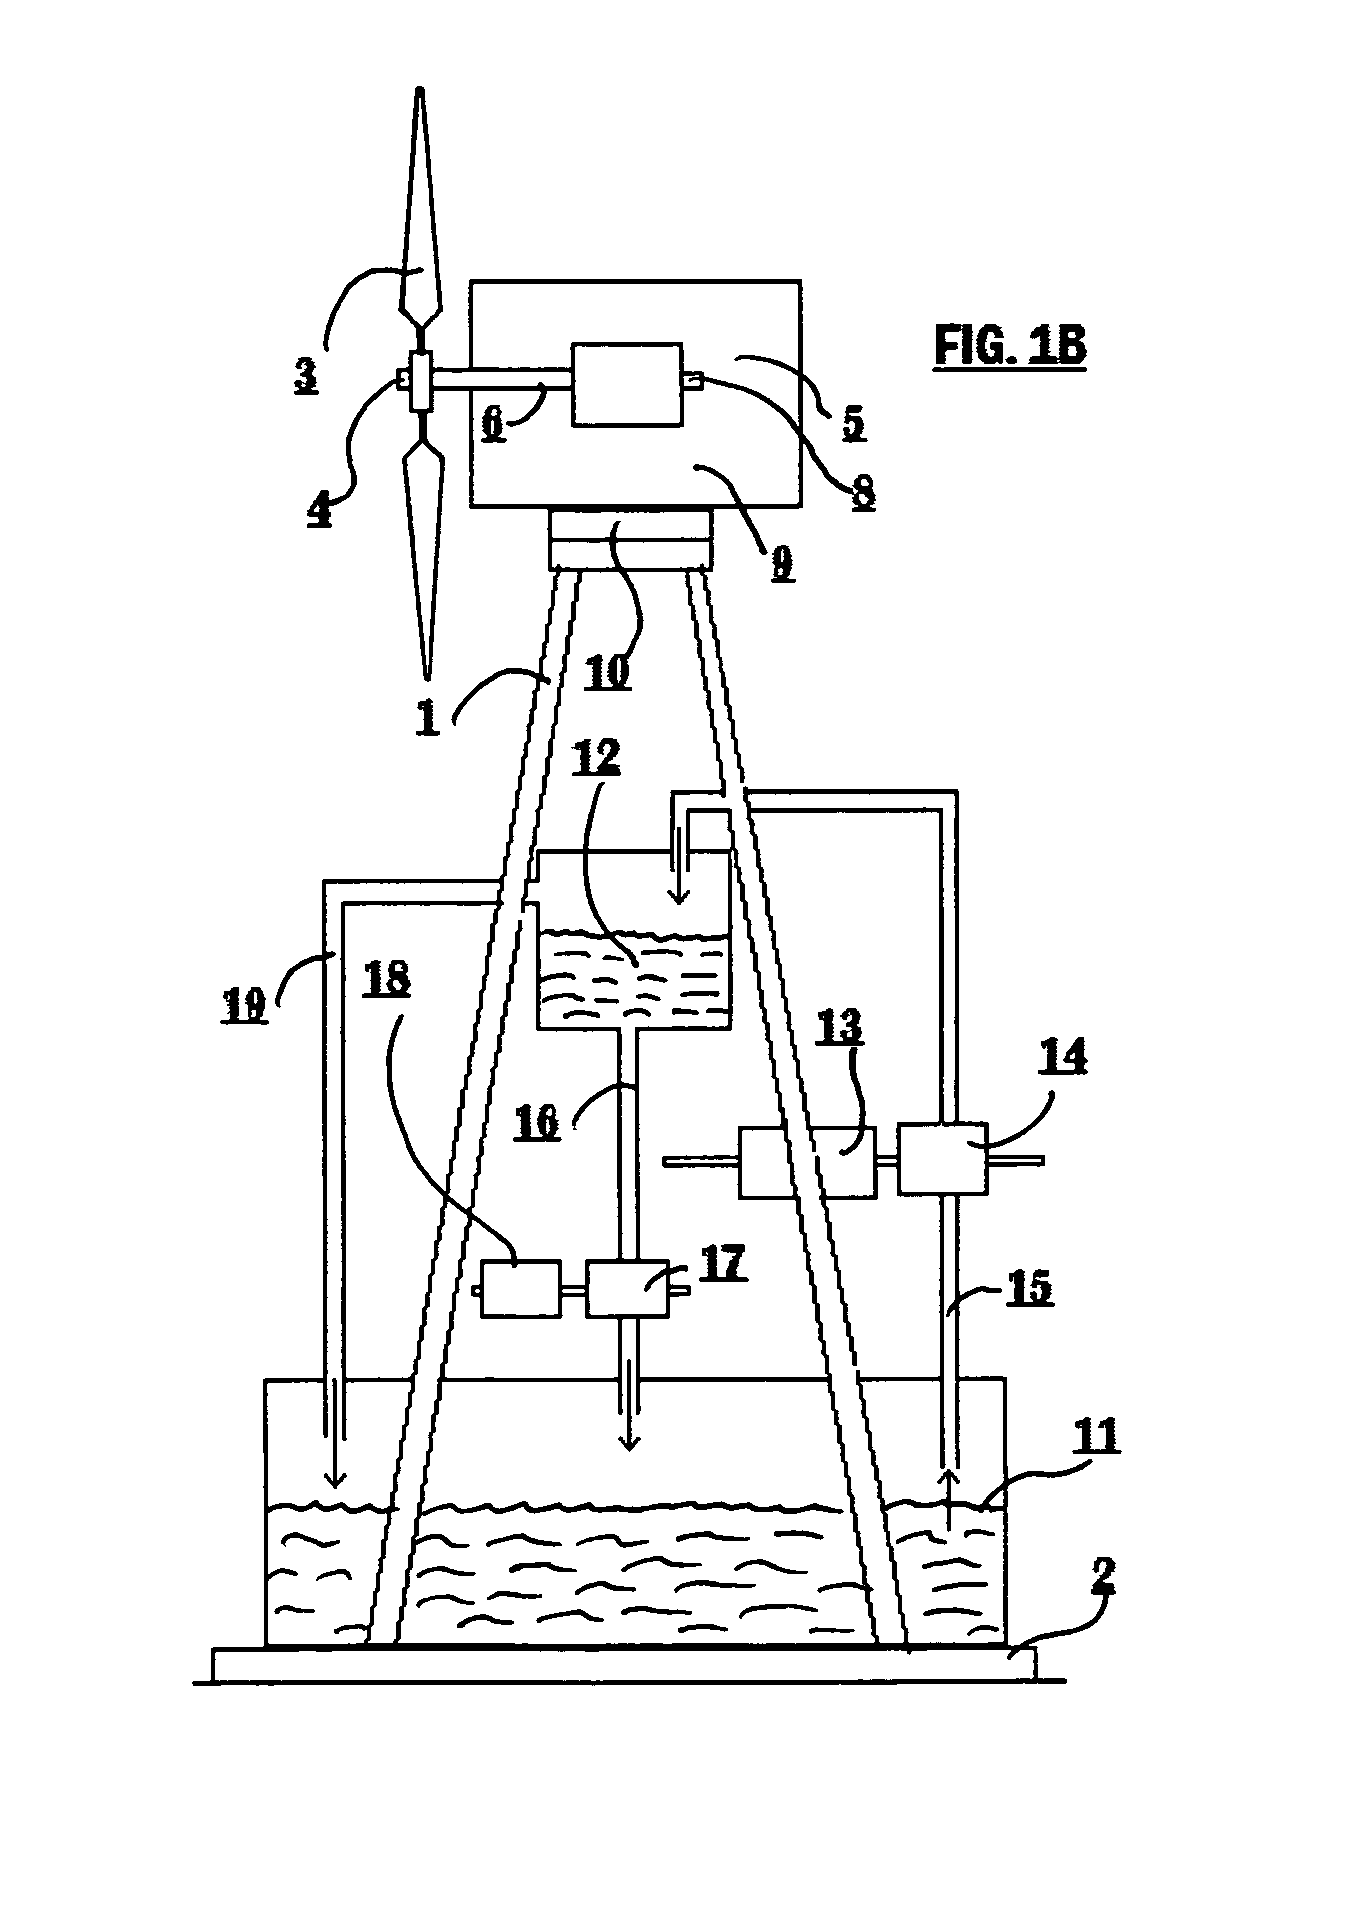 Hybrid water pressure energy accumulating tower(s) connected to a wind turbine or power plants